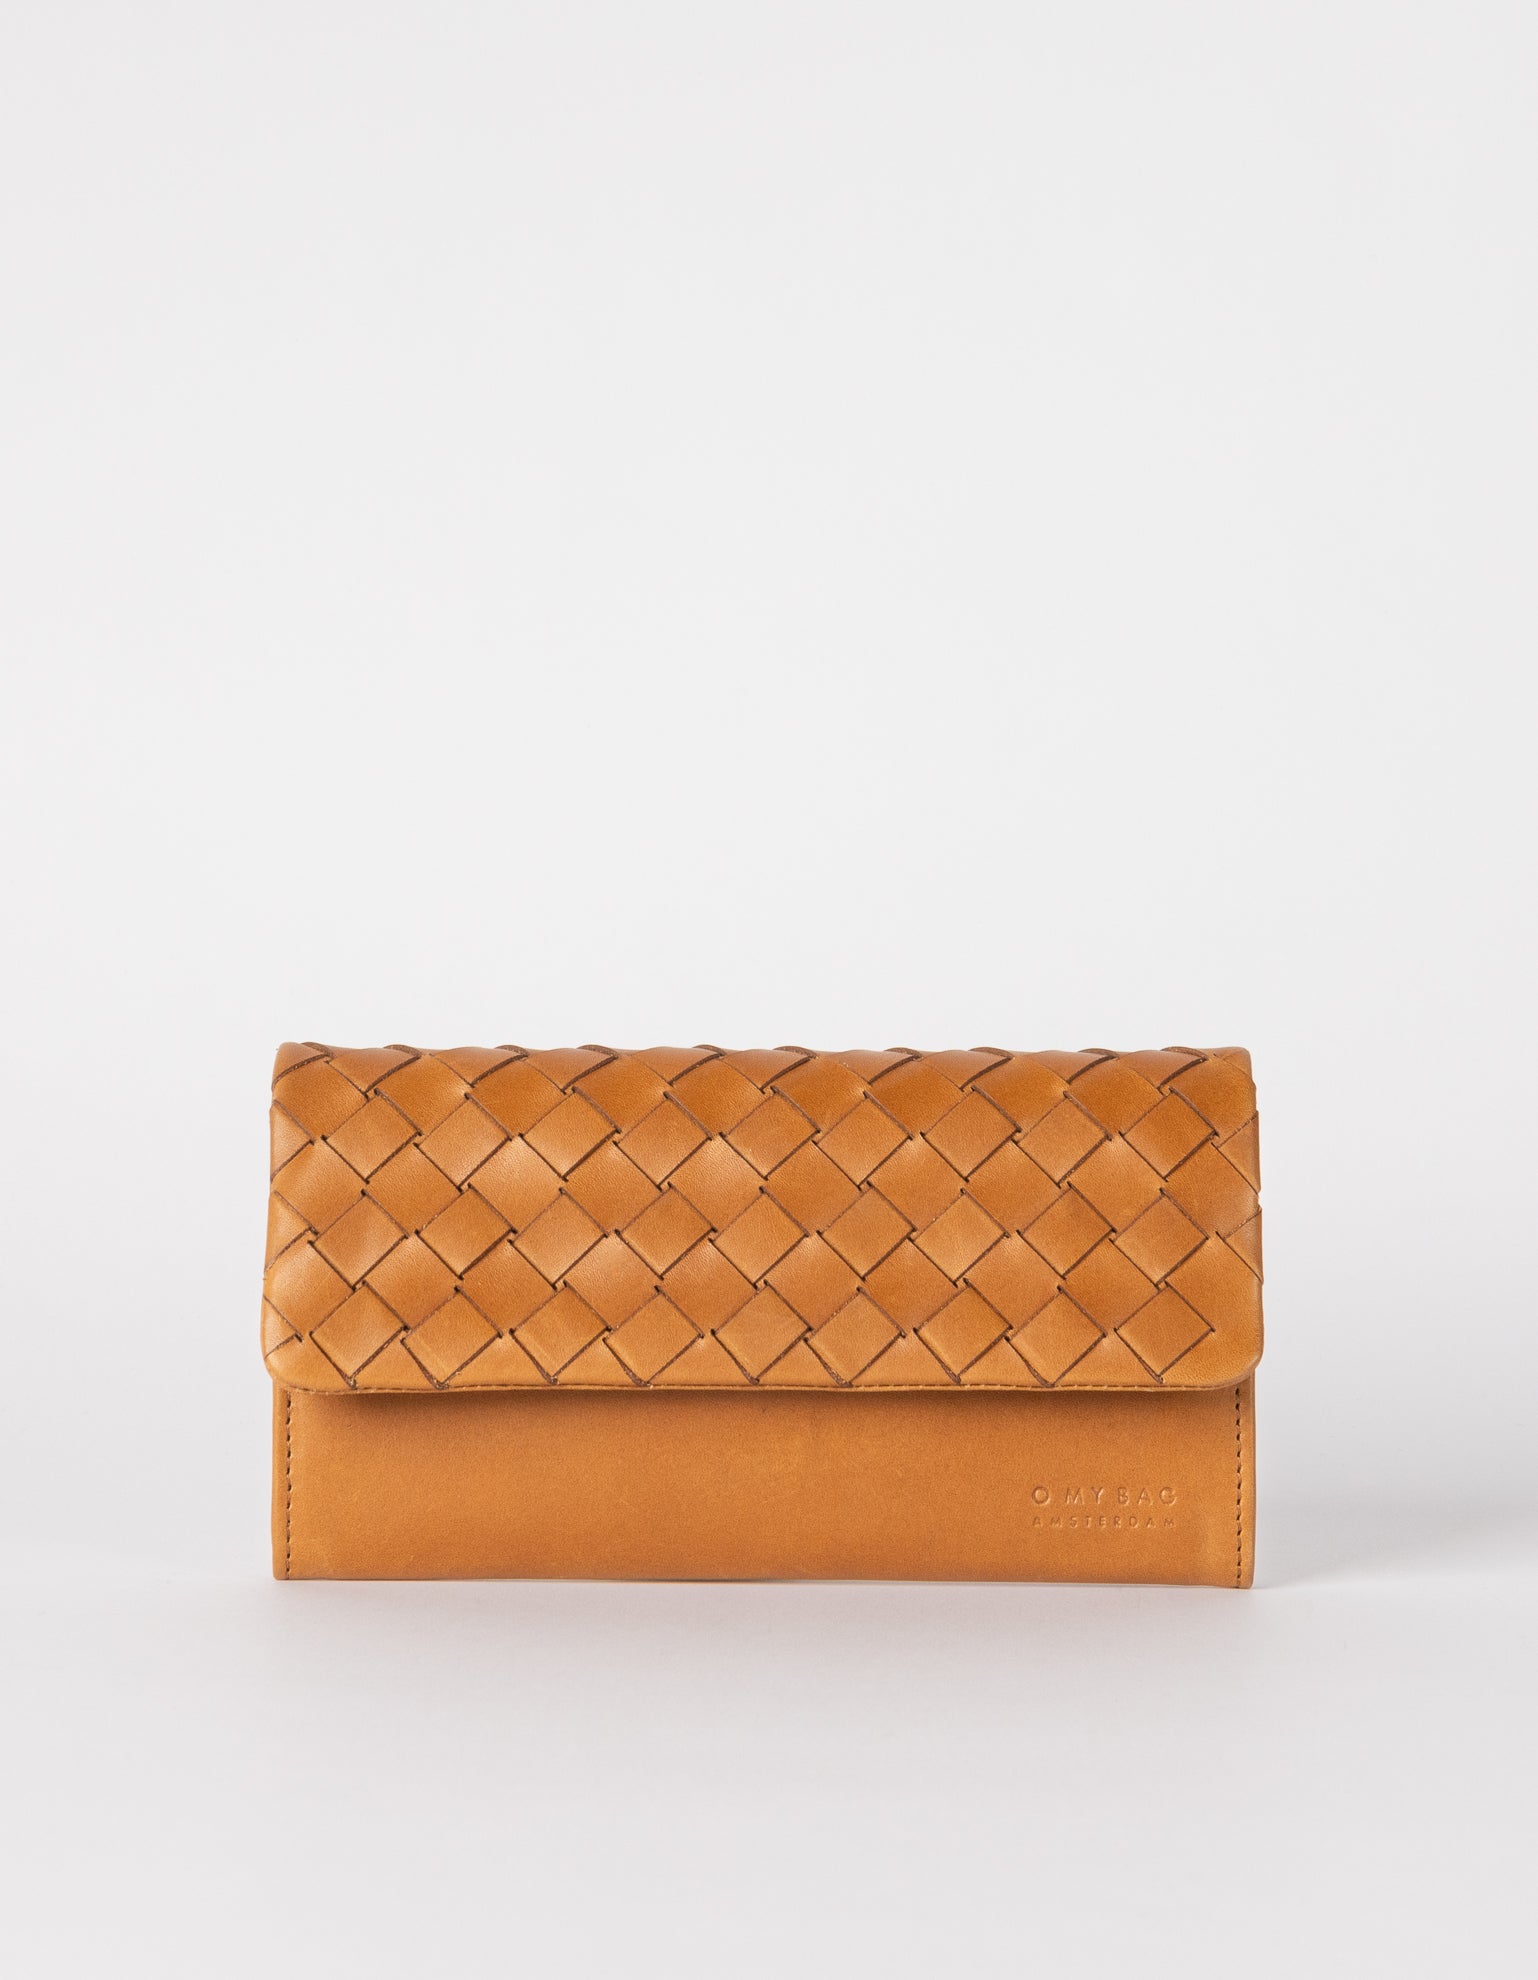 Woven Leather wallet - Front product image